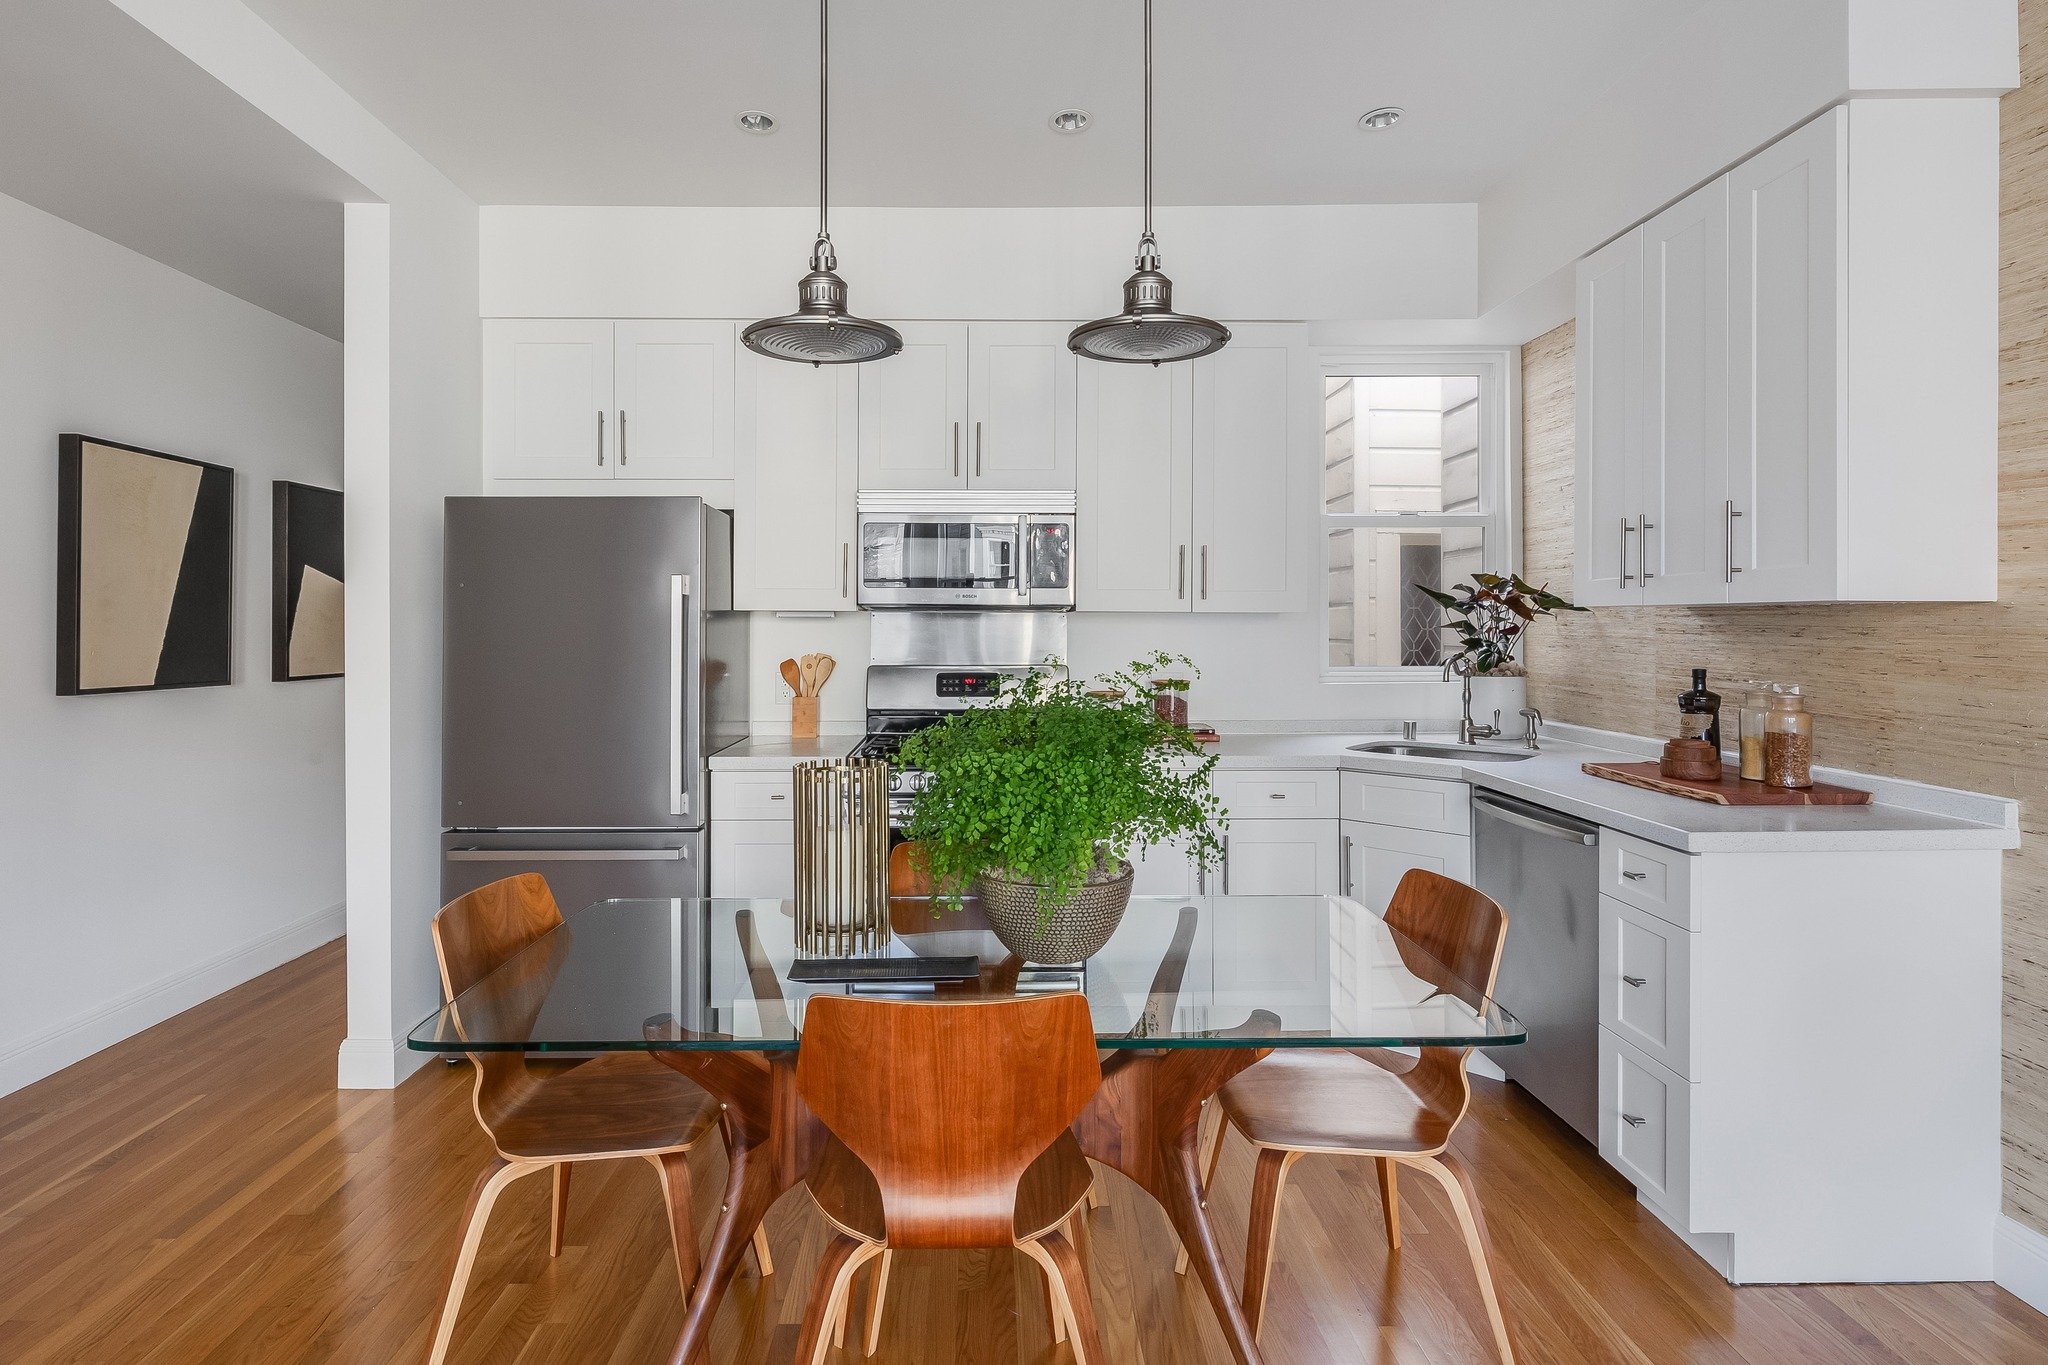 Client Spotlight: Ryan Richard, Compass

Live the Mission Dolores lifestyle! This sleek 2-bedroom flat is a half-block west of Valencia in the heart of the Mission's culinary strip, with views from the updated rooftop deck of downtown SF and Dolores 